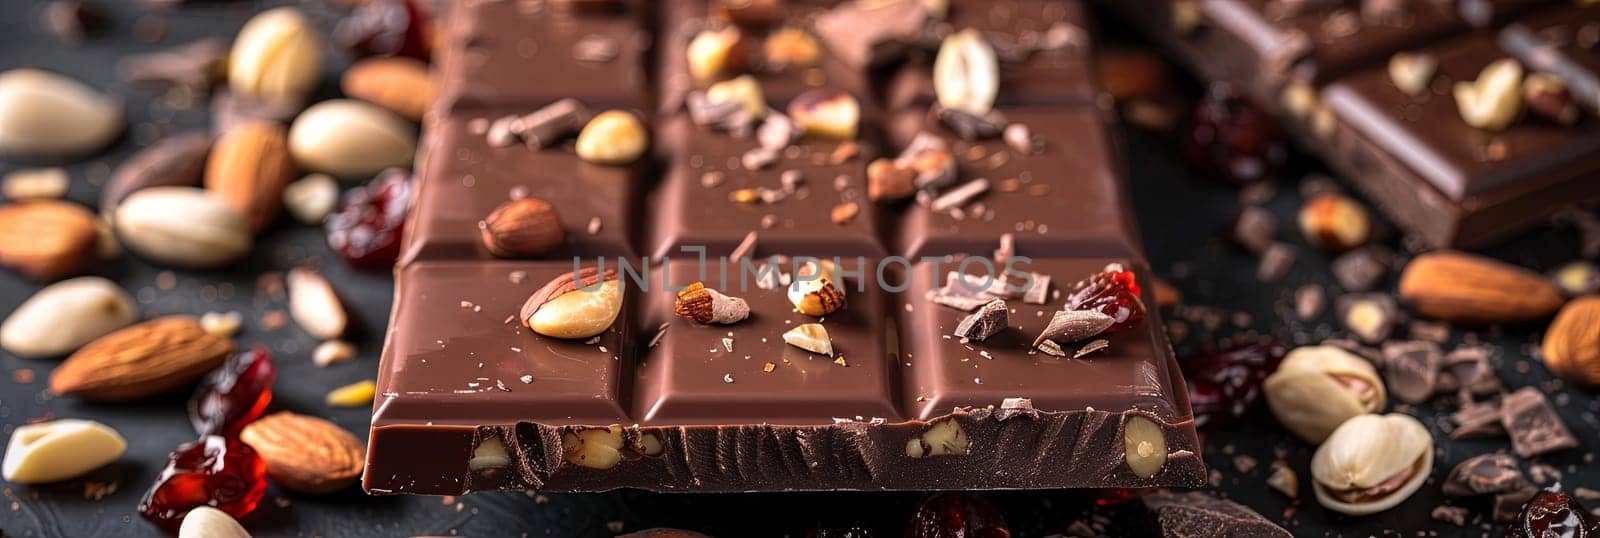 Detailed close-up of a chocolate bar filled with nuts, showcasing rich textures and natural ingredients.